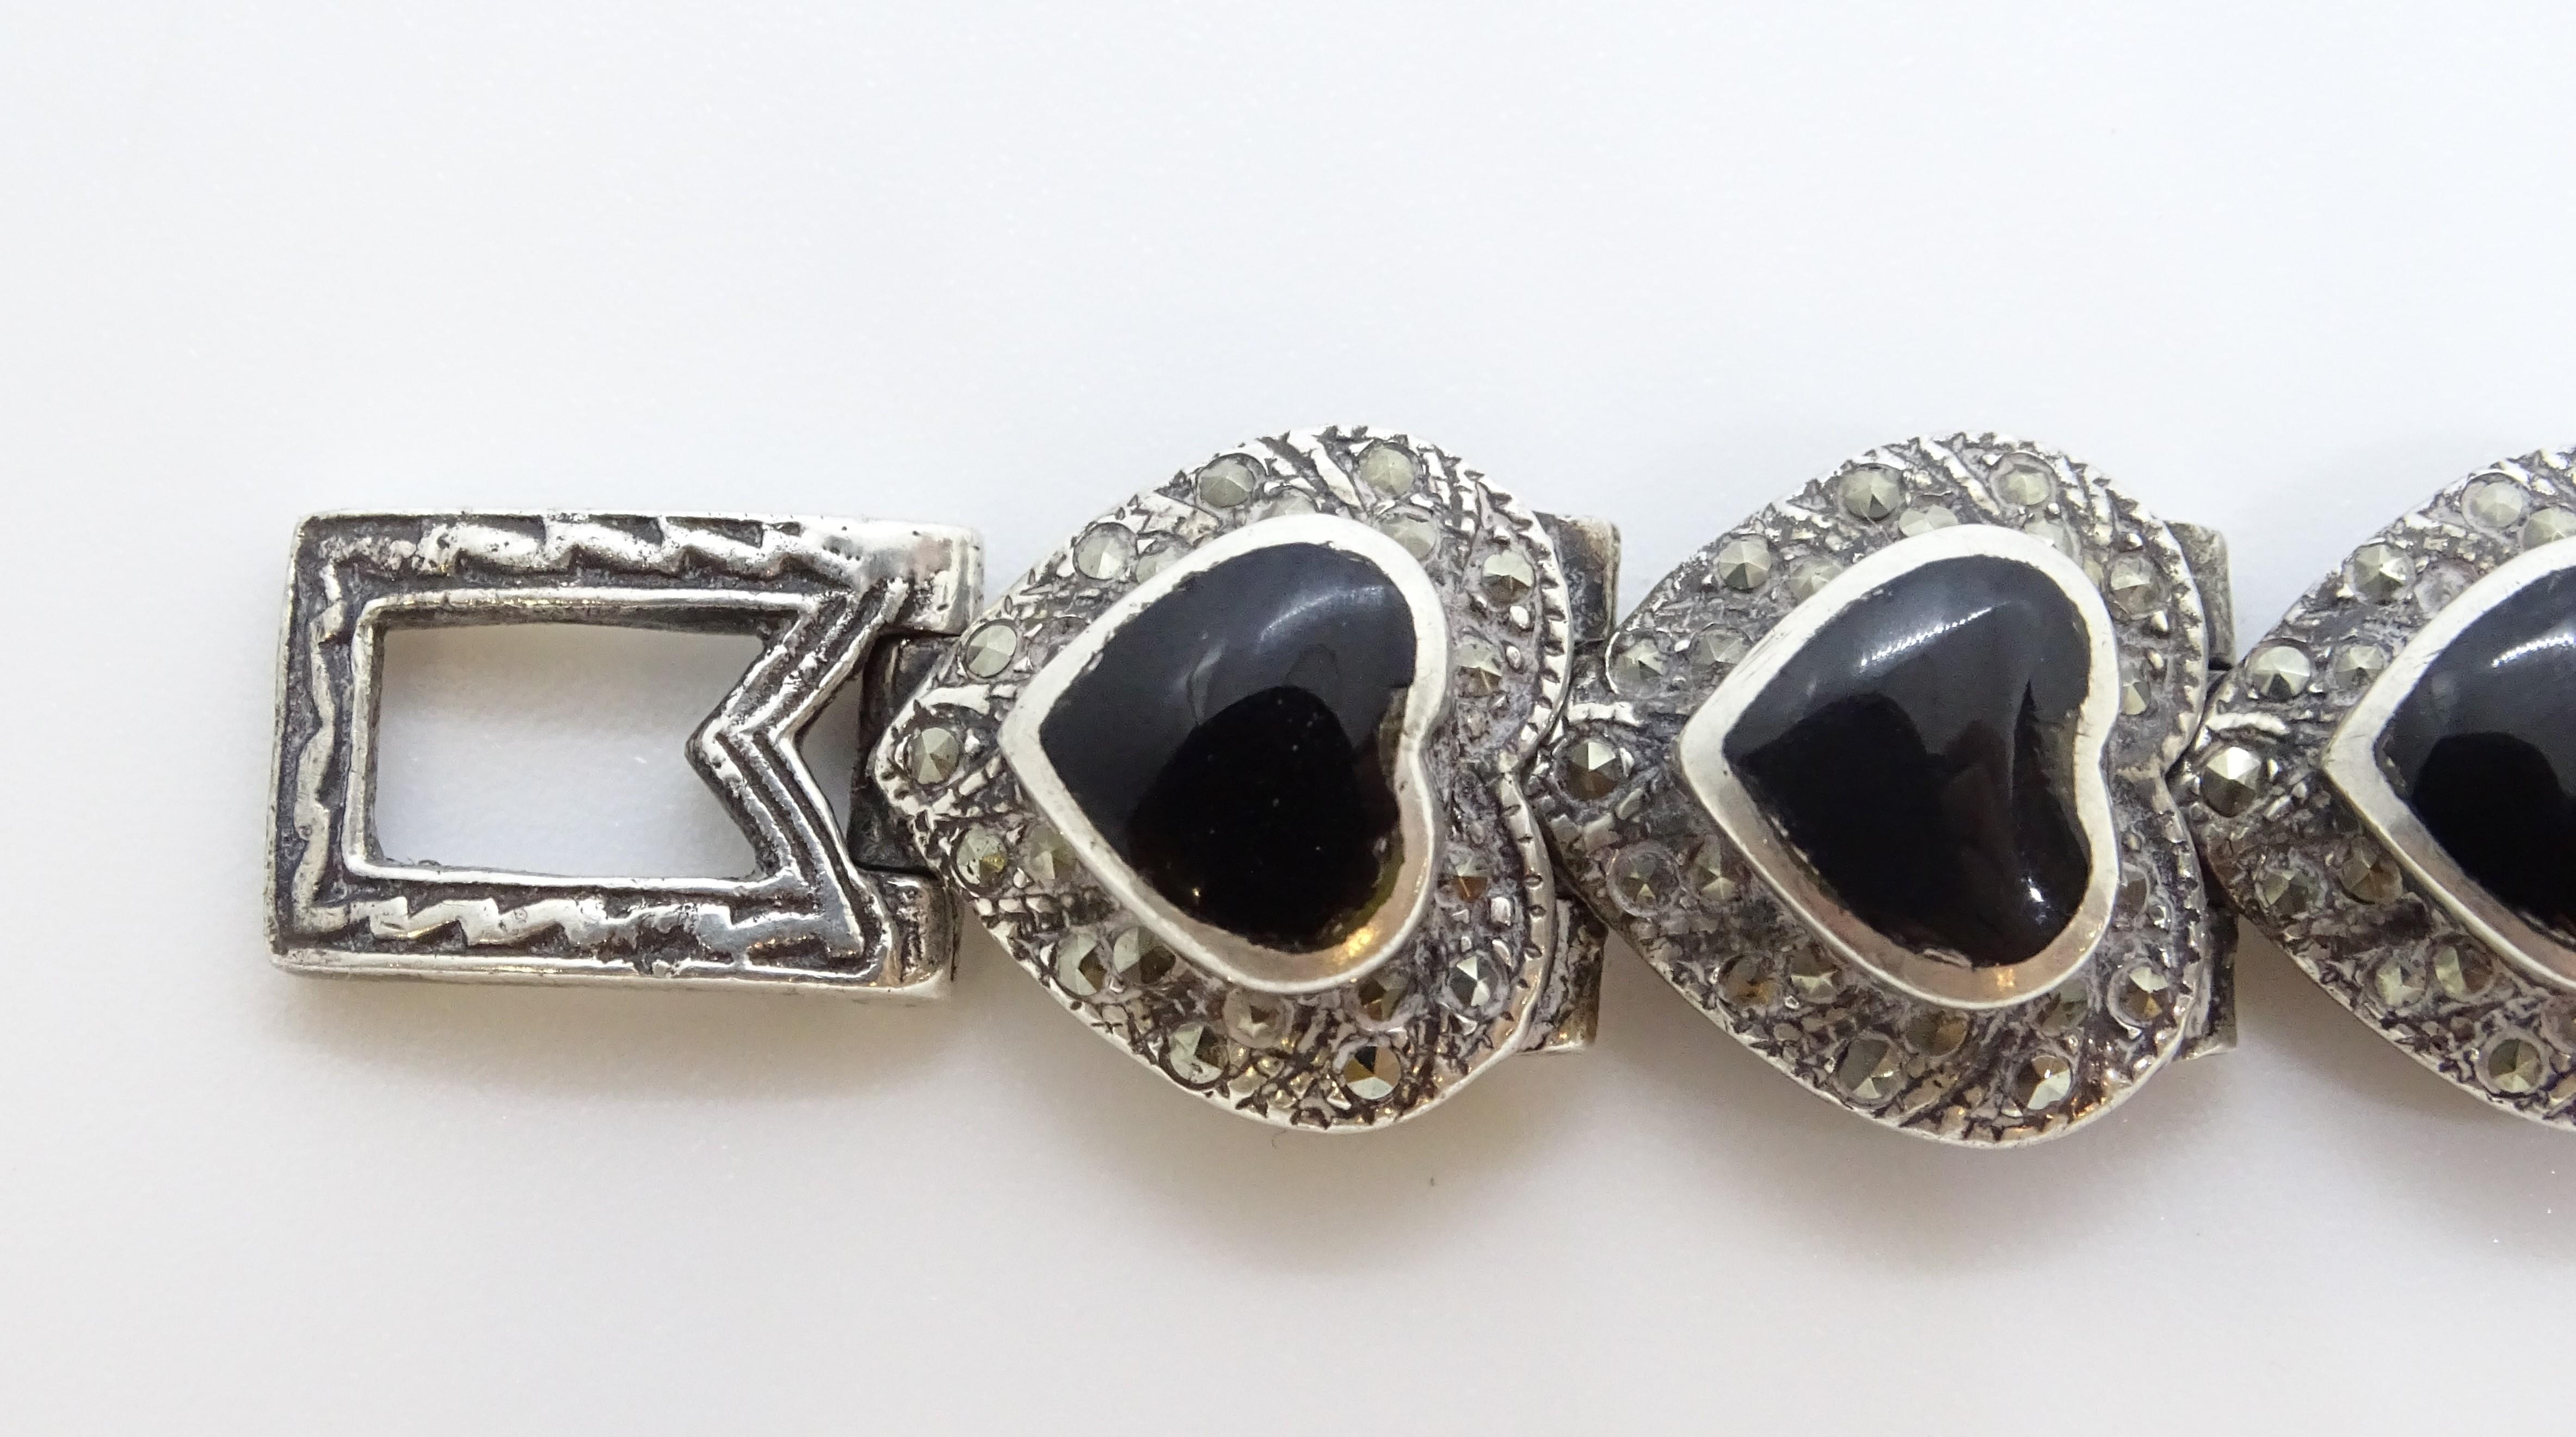 Silver and onyx watch for women - Vintage, s. XX For Sale 8